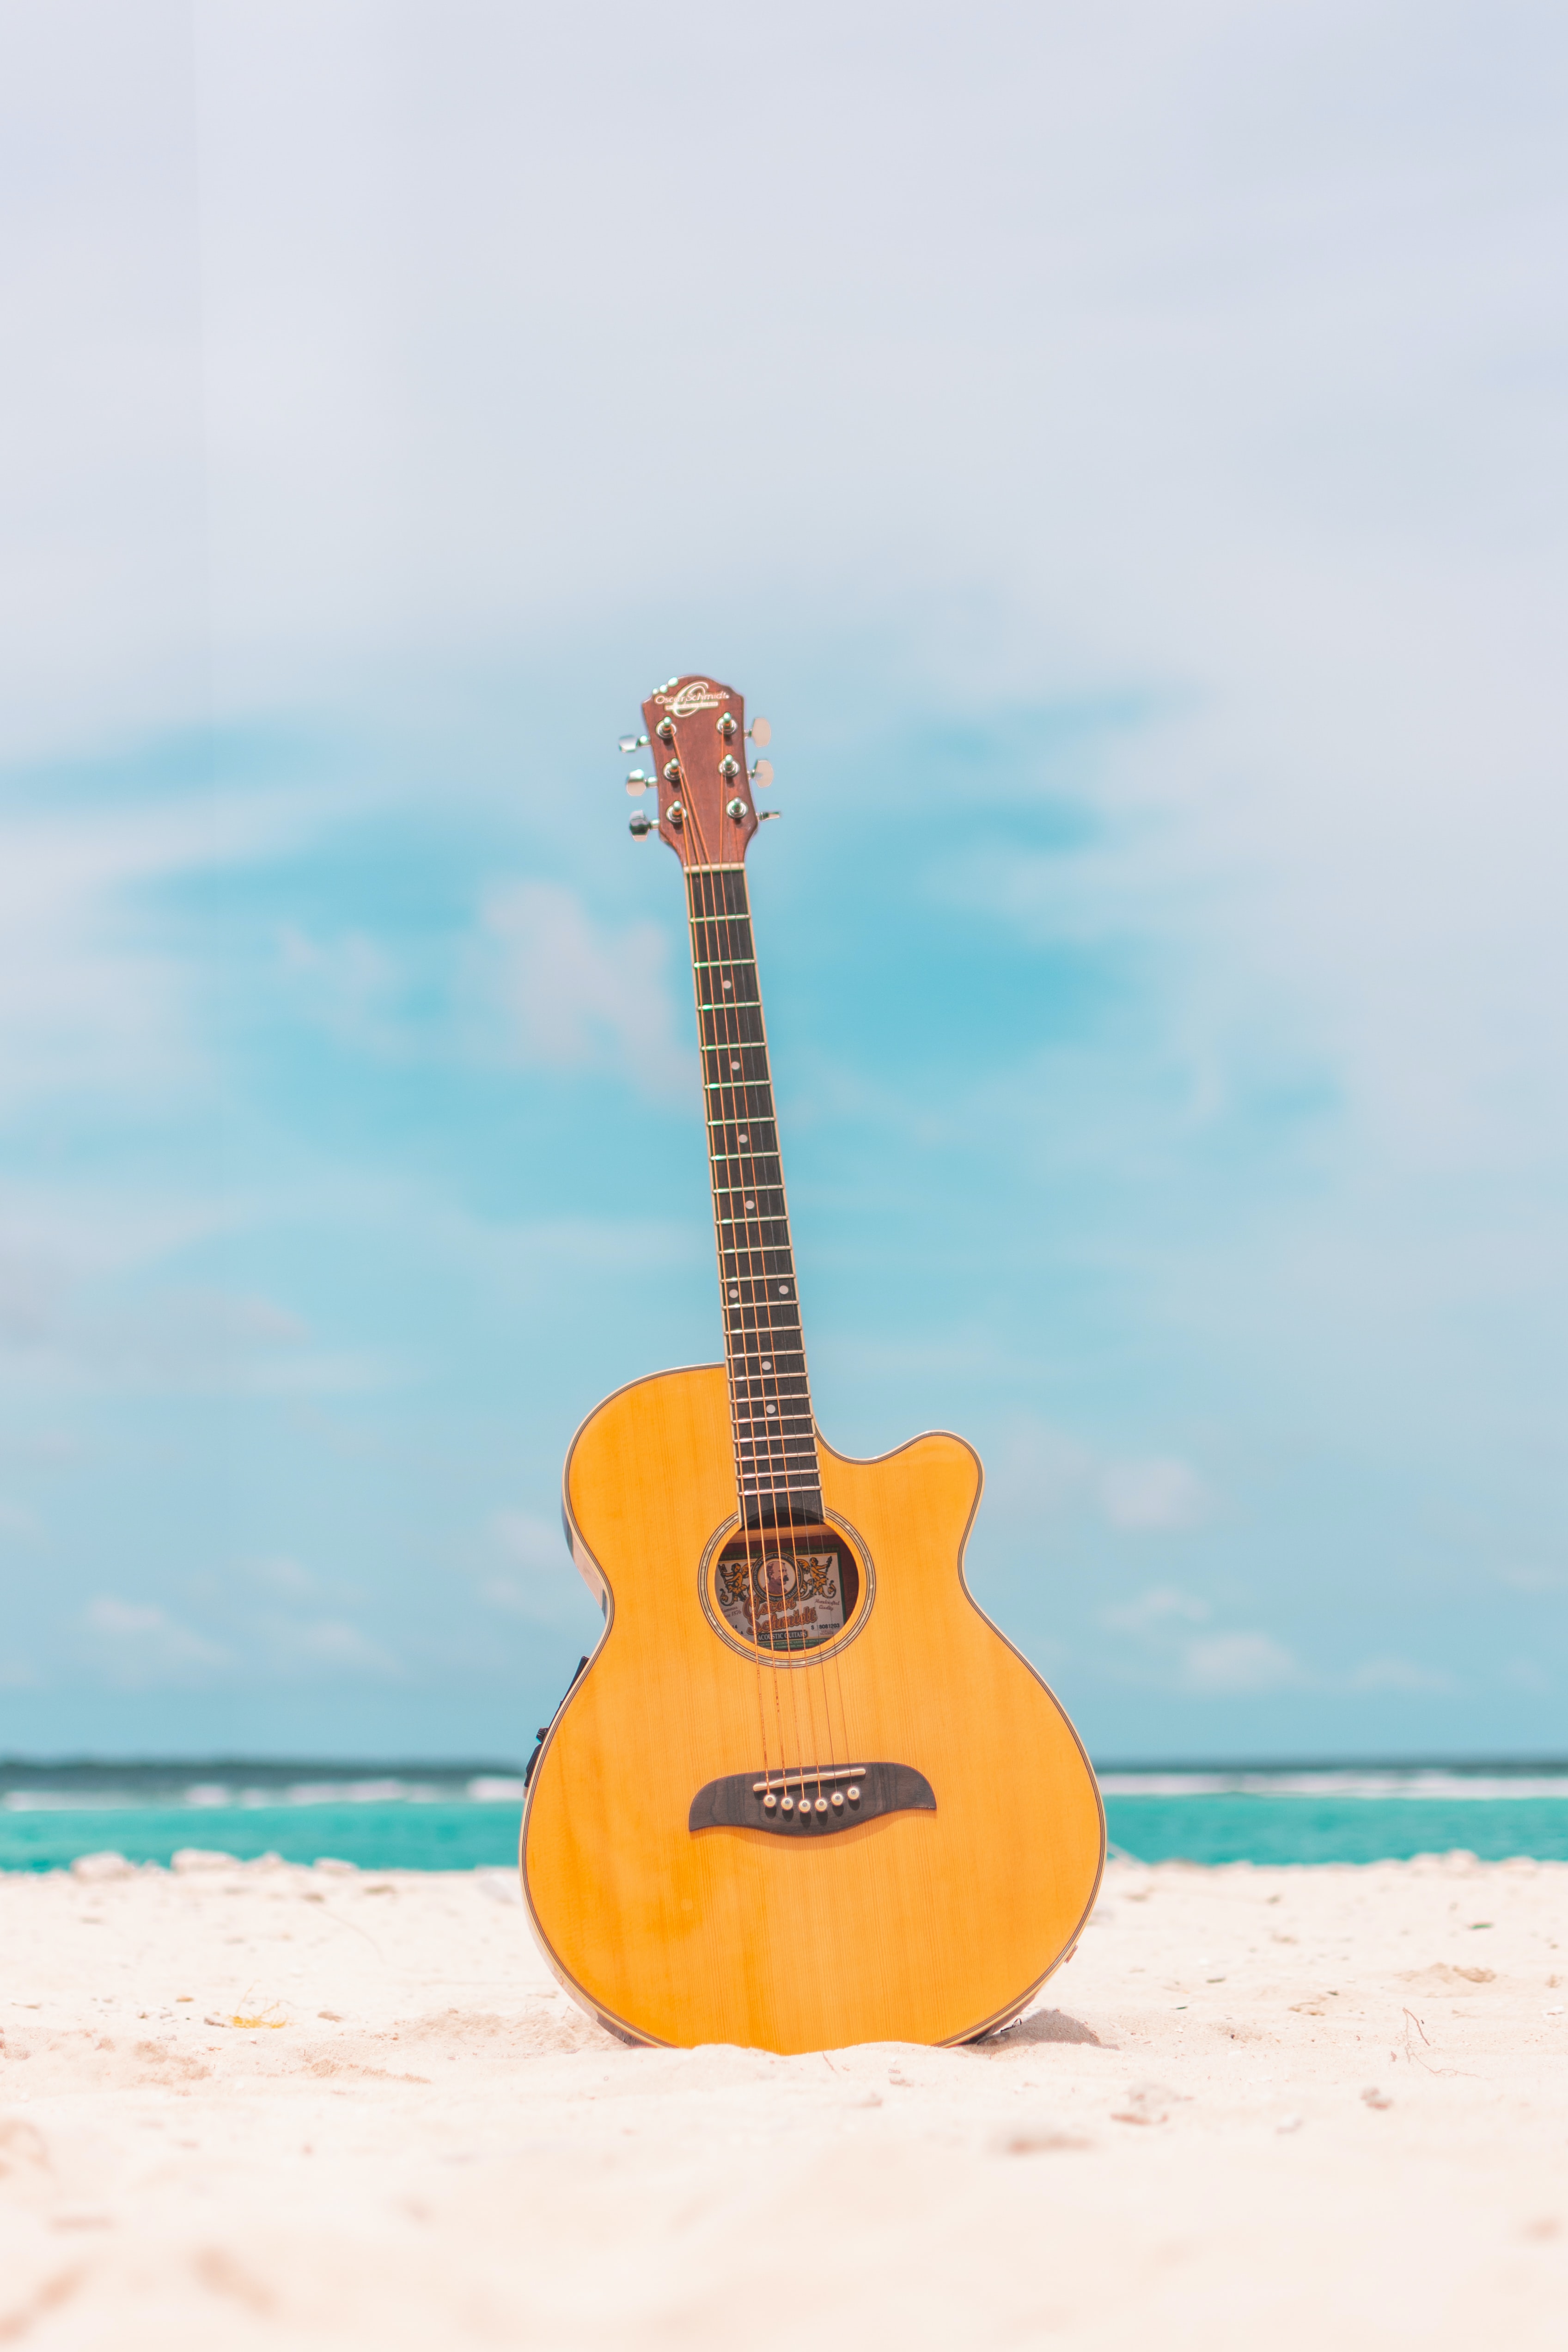 beach, tool, music, acoustic guitar collection of HD images